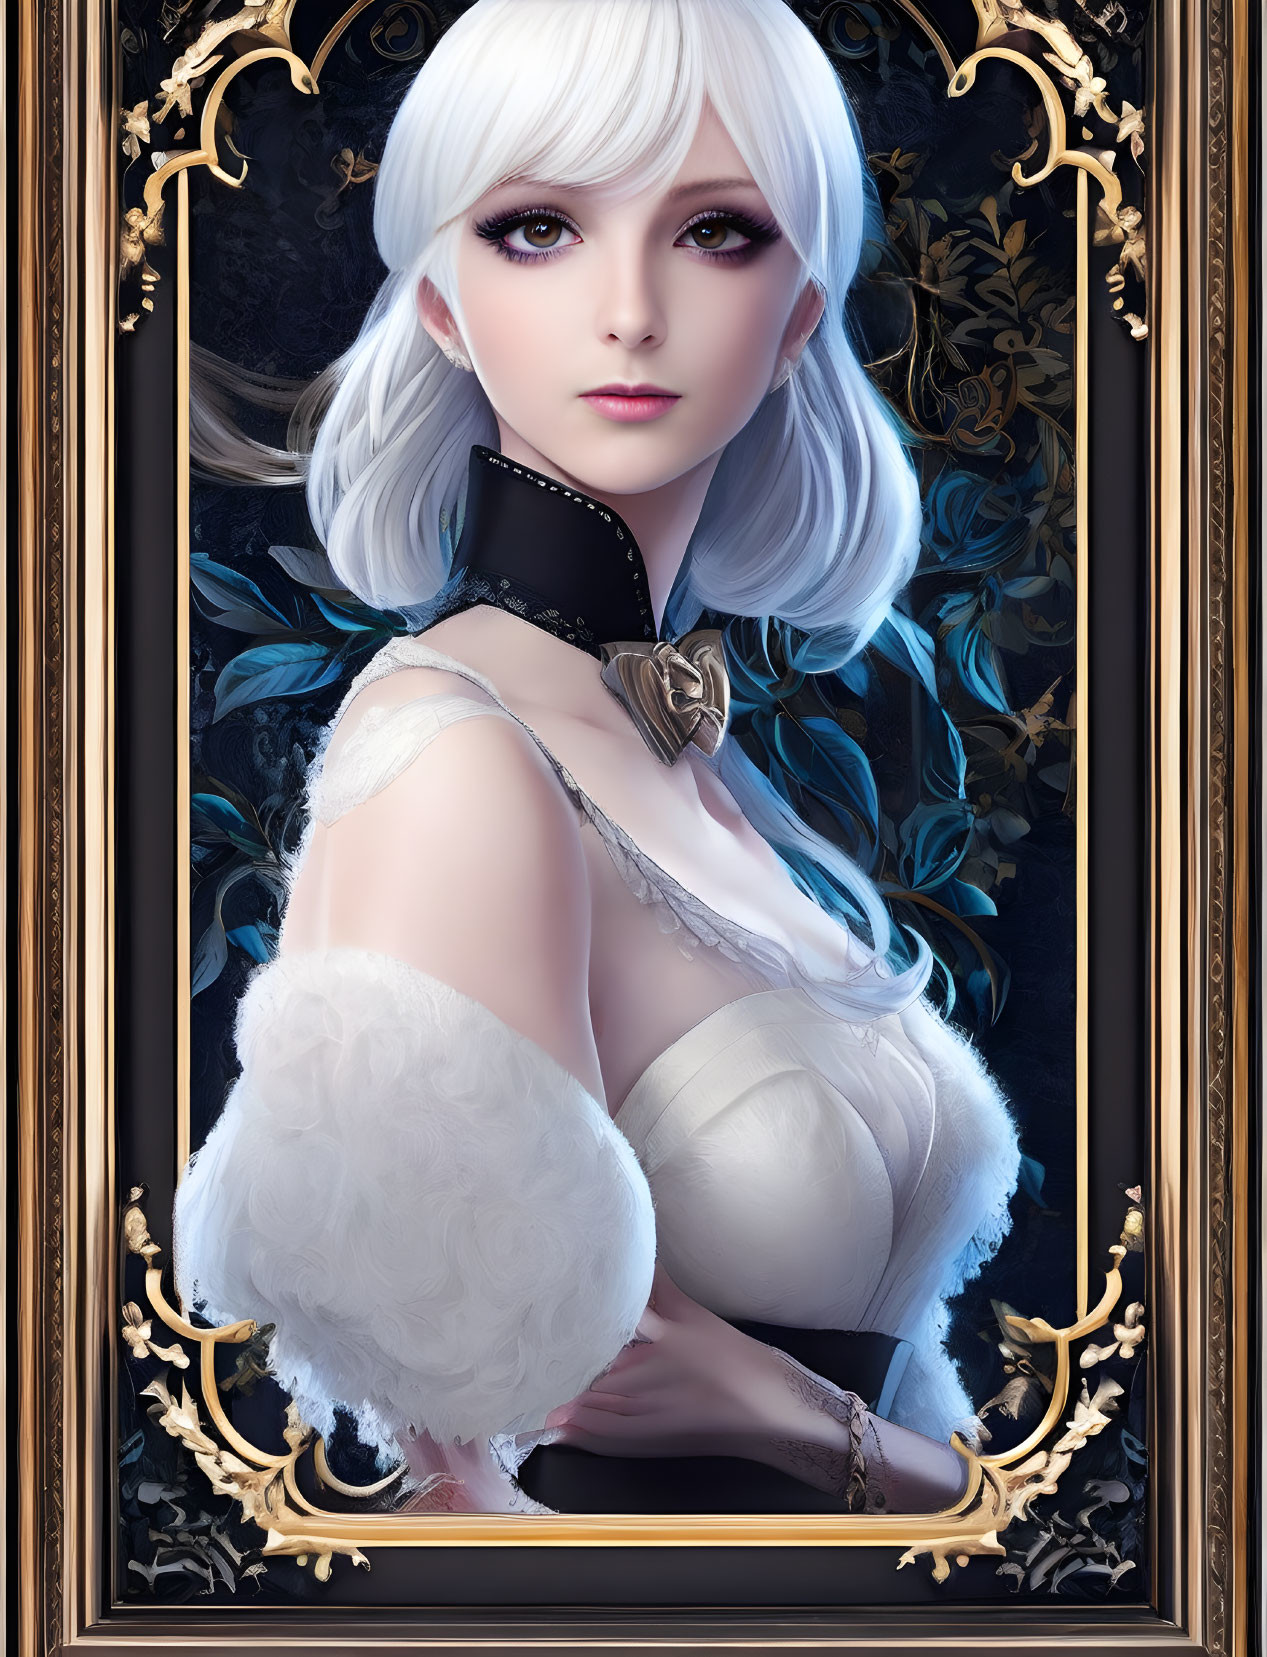 Digital portrait: Female fantasy character with white hair, pale skin, and violet eyes in golden frame